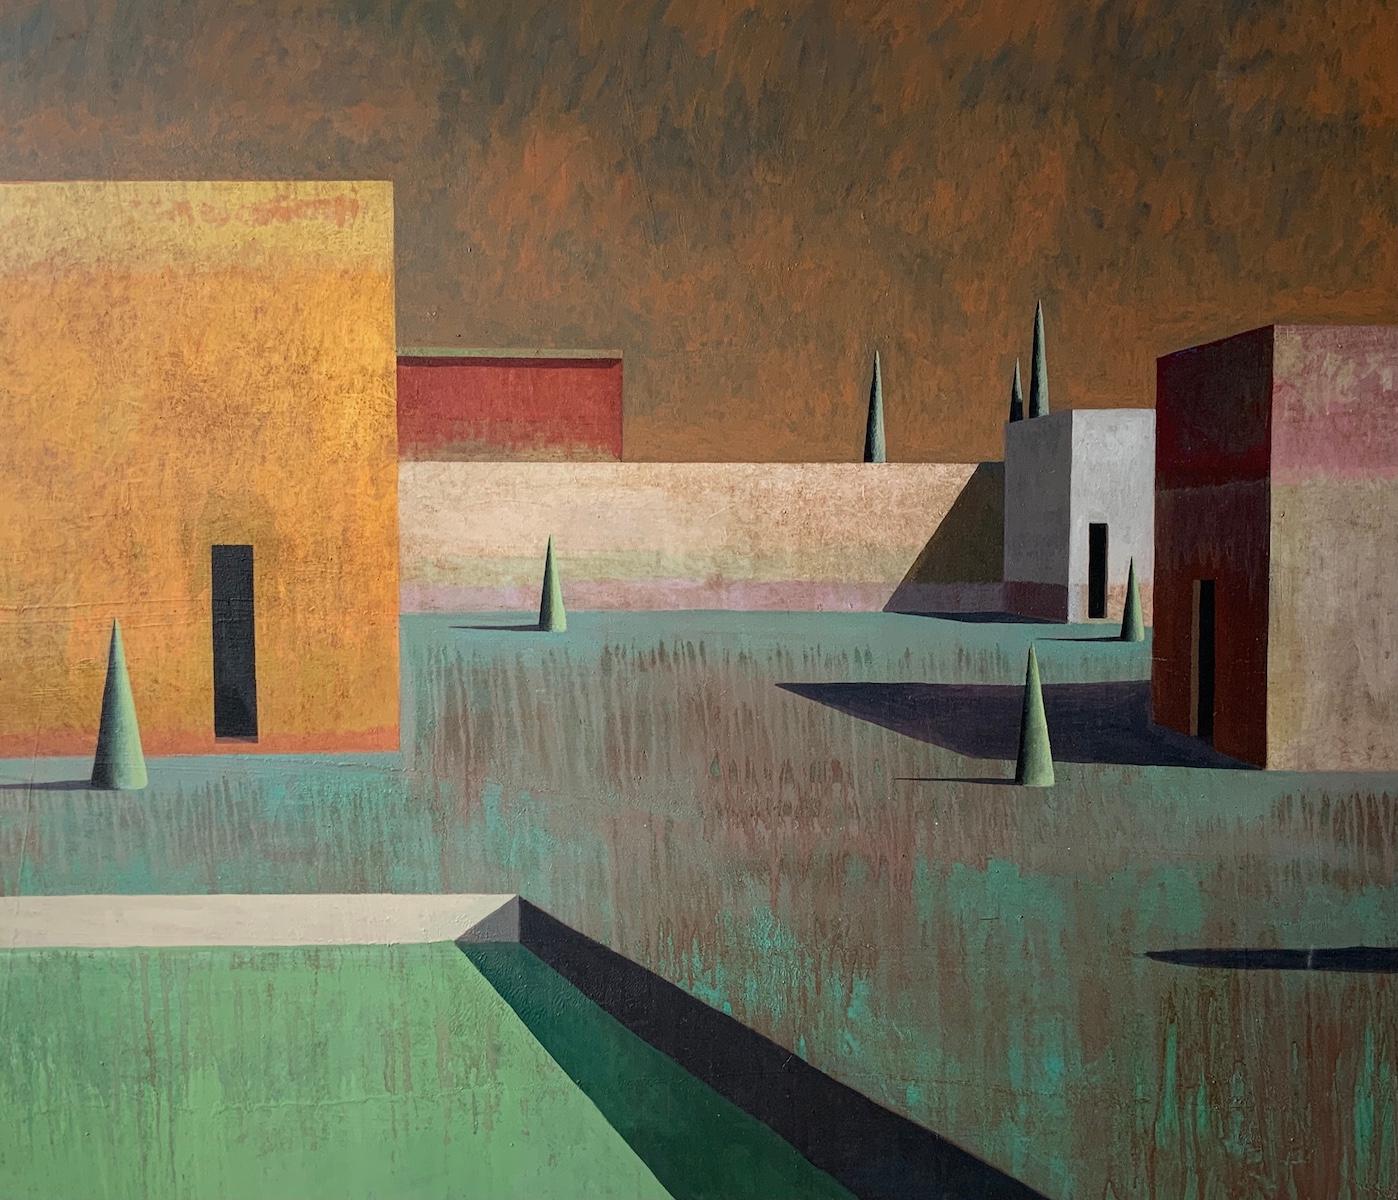 Arca 6 by Ramon Enrich - Contemporary Geometric Landscape Painting, earth tones